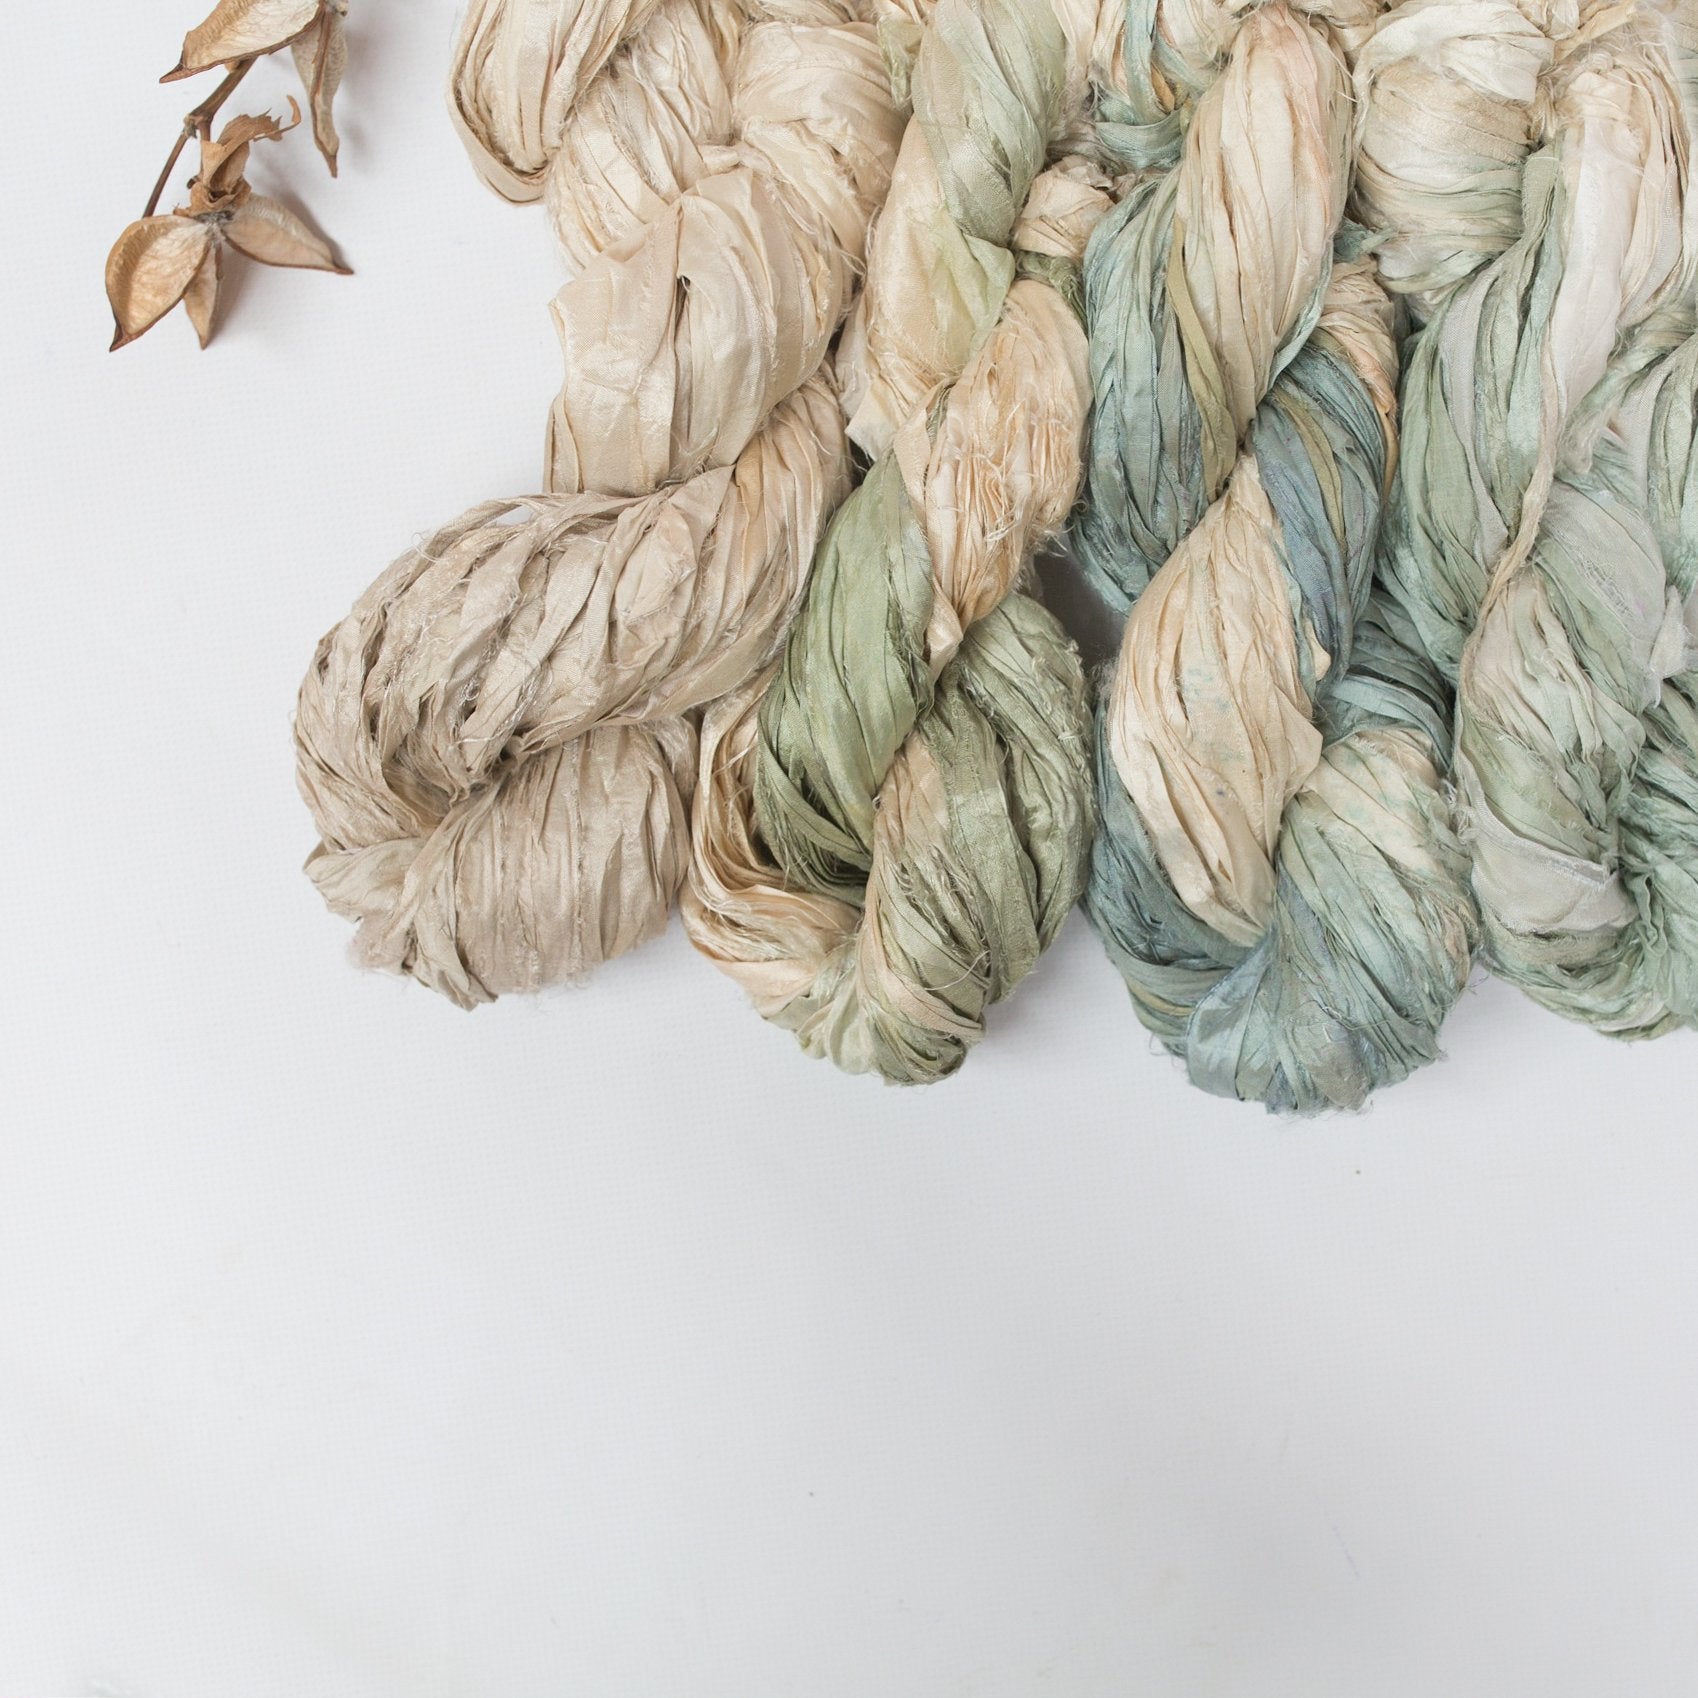 Ombre' Recycled Sari Silk Ribbon, Mary Maker Studio - Macrame & Weaving  Supplies and Education.